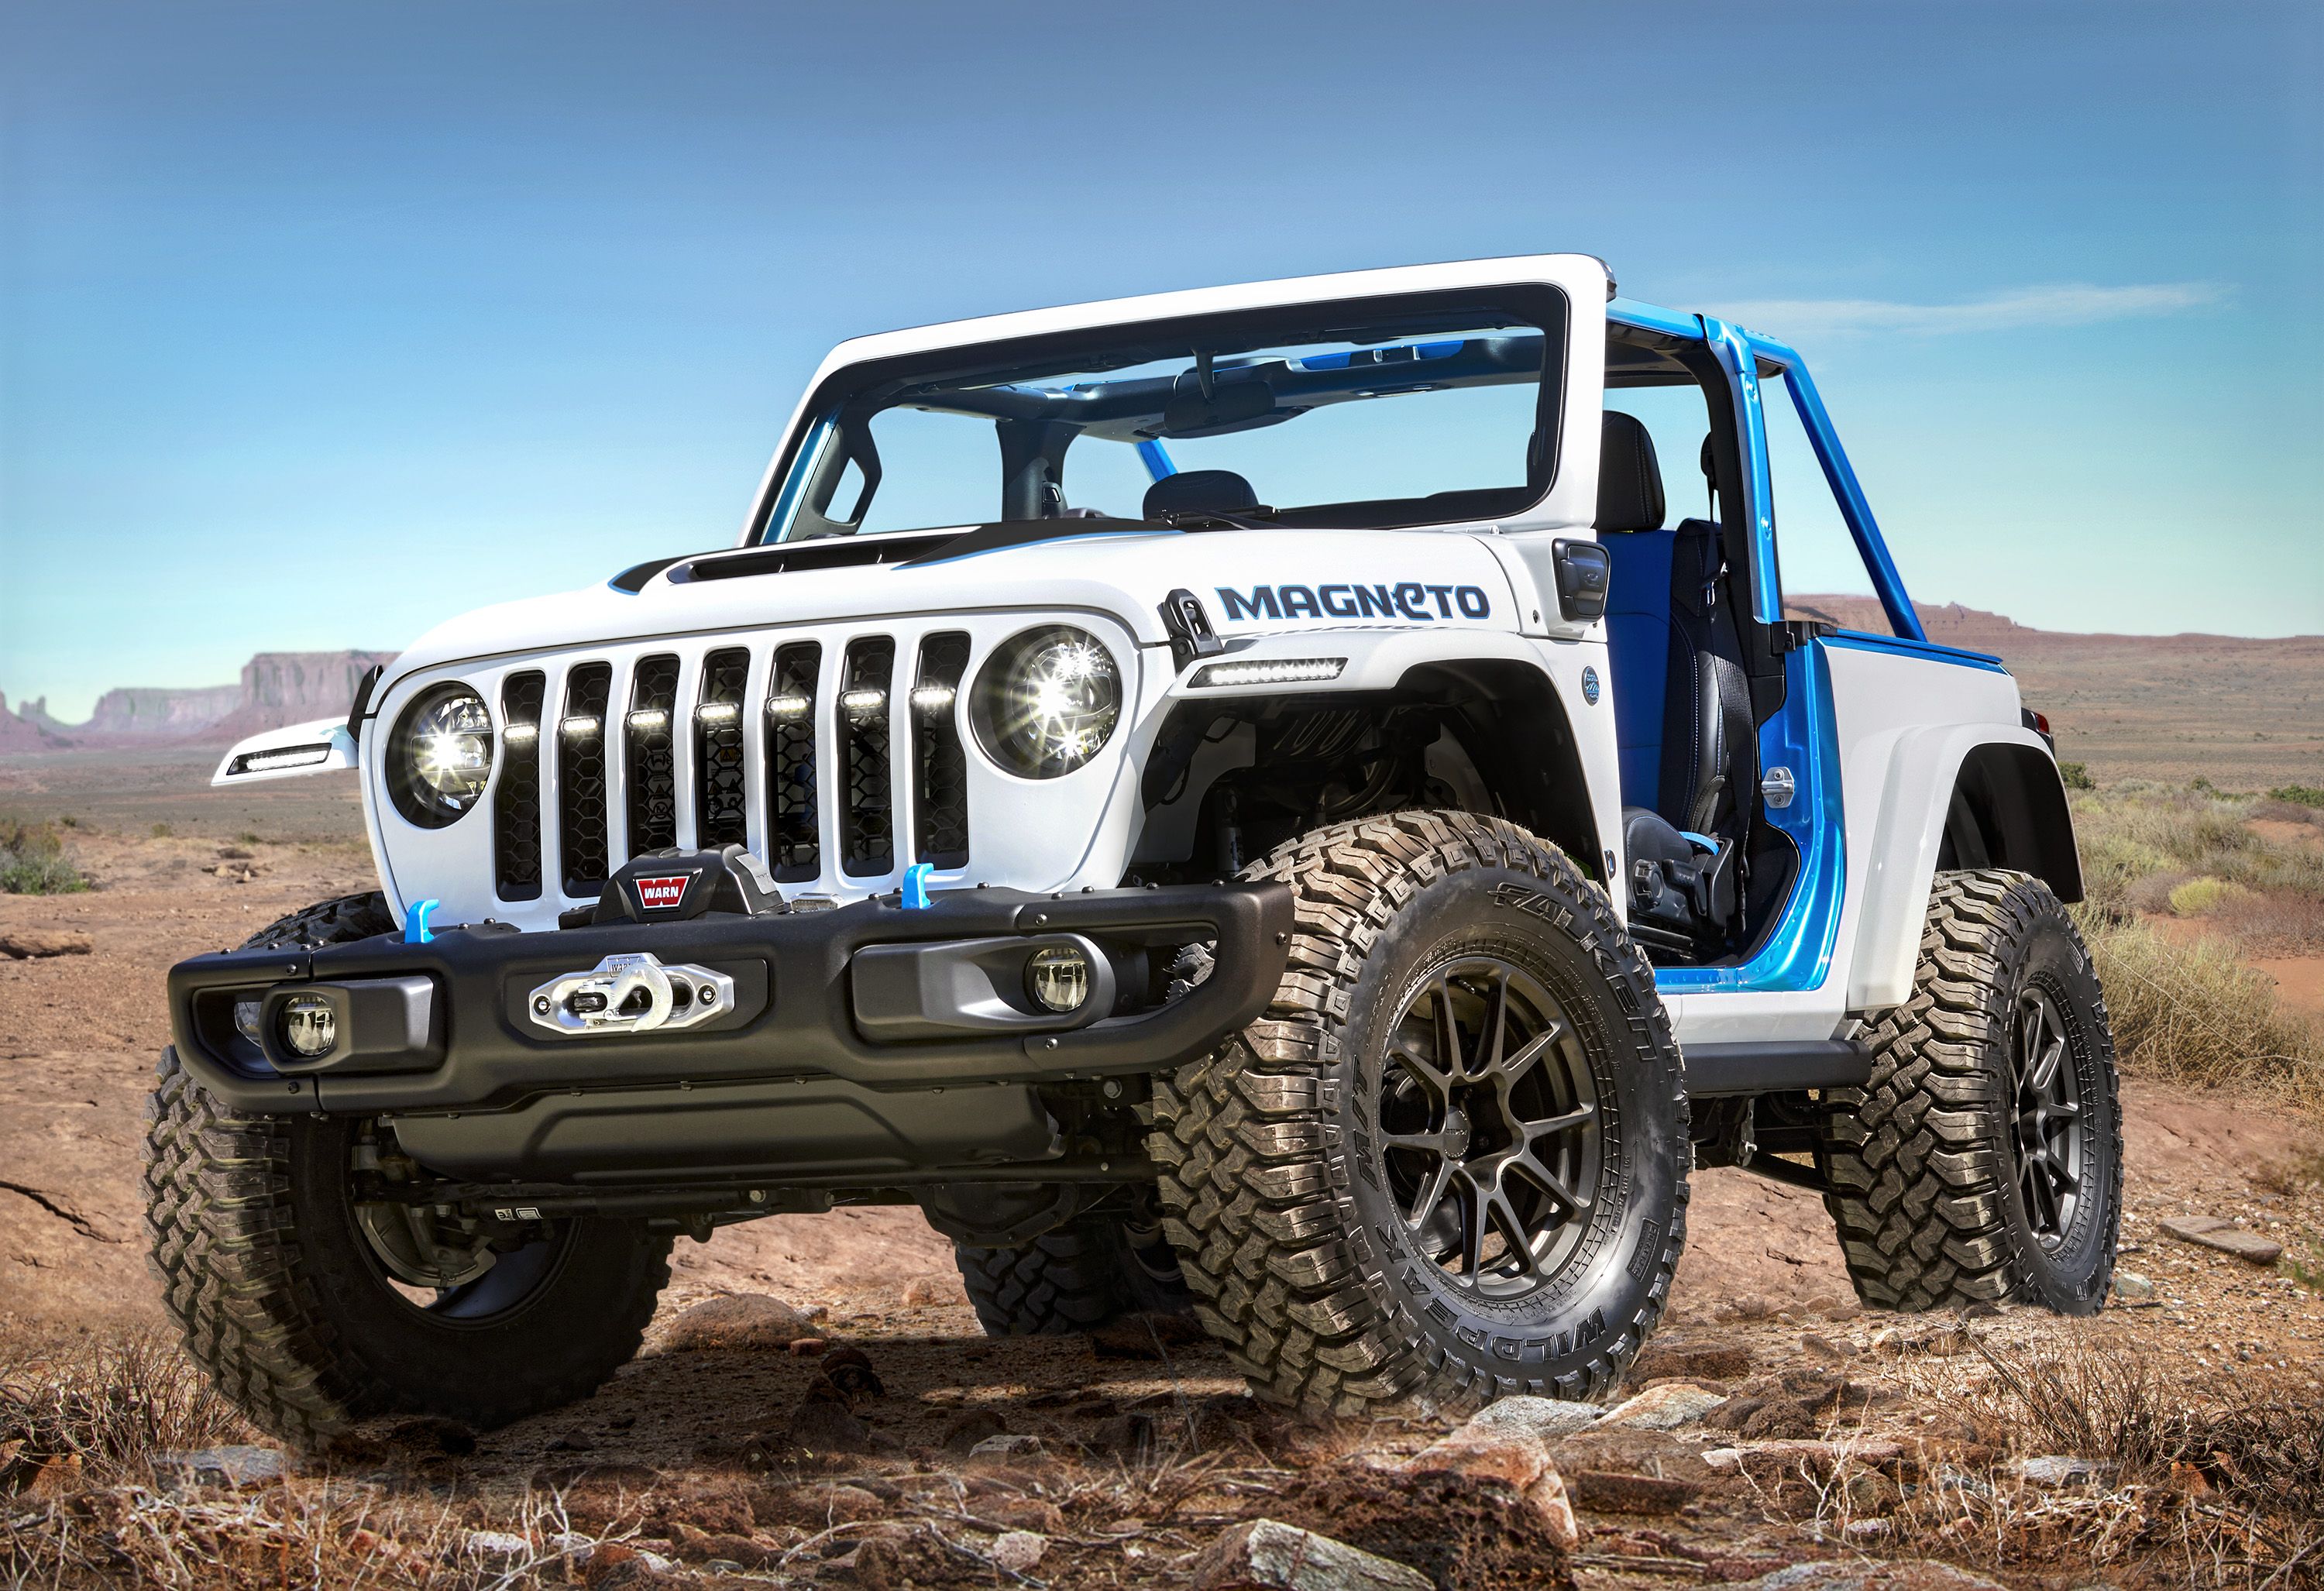 Jeep's Electric Wrangler Magneto Is a 2021 Easter Jeep Safari Star